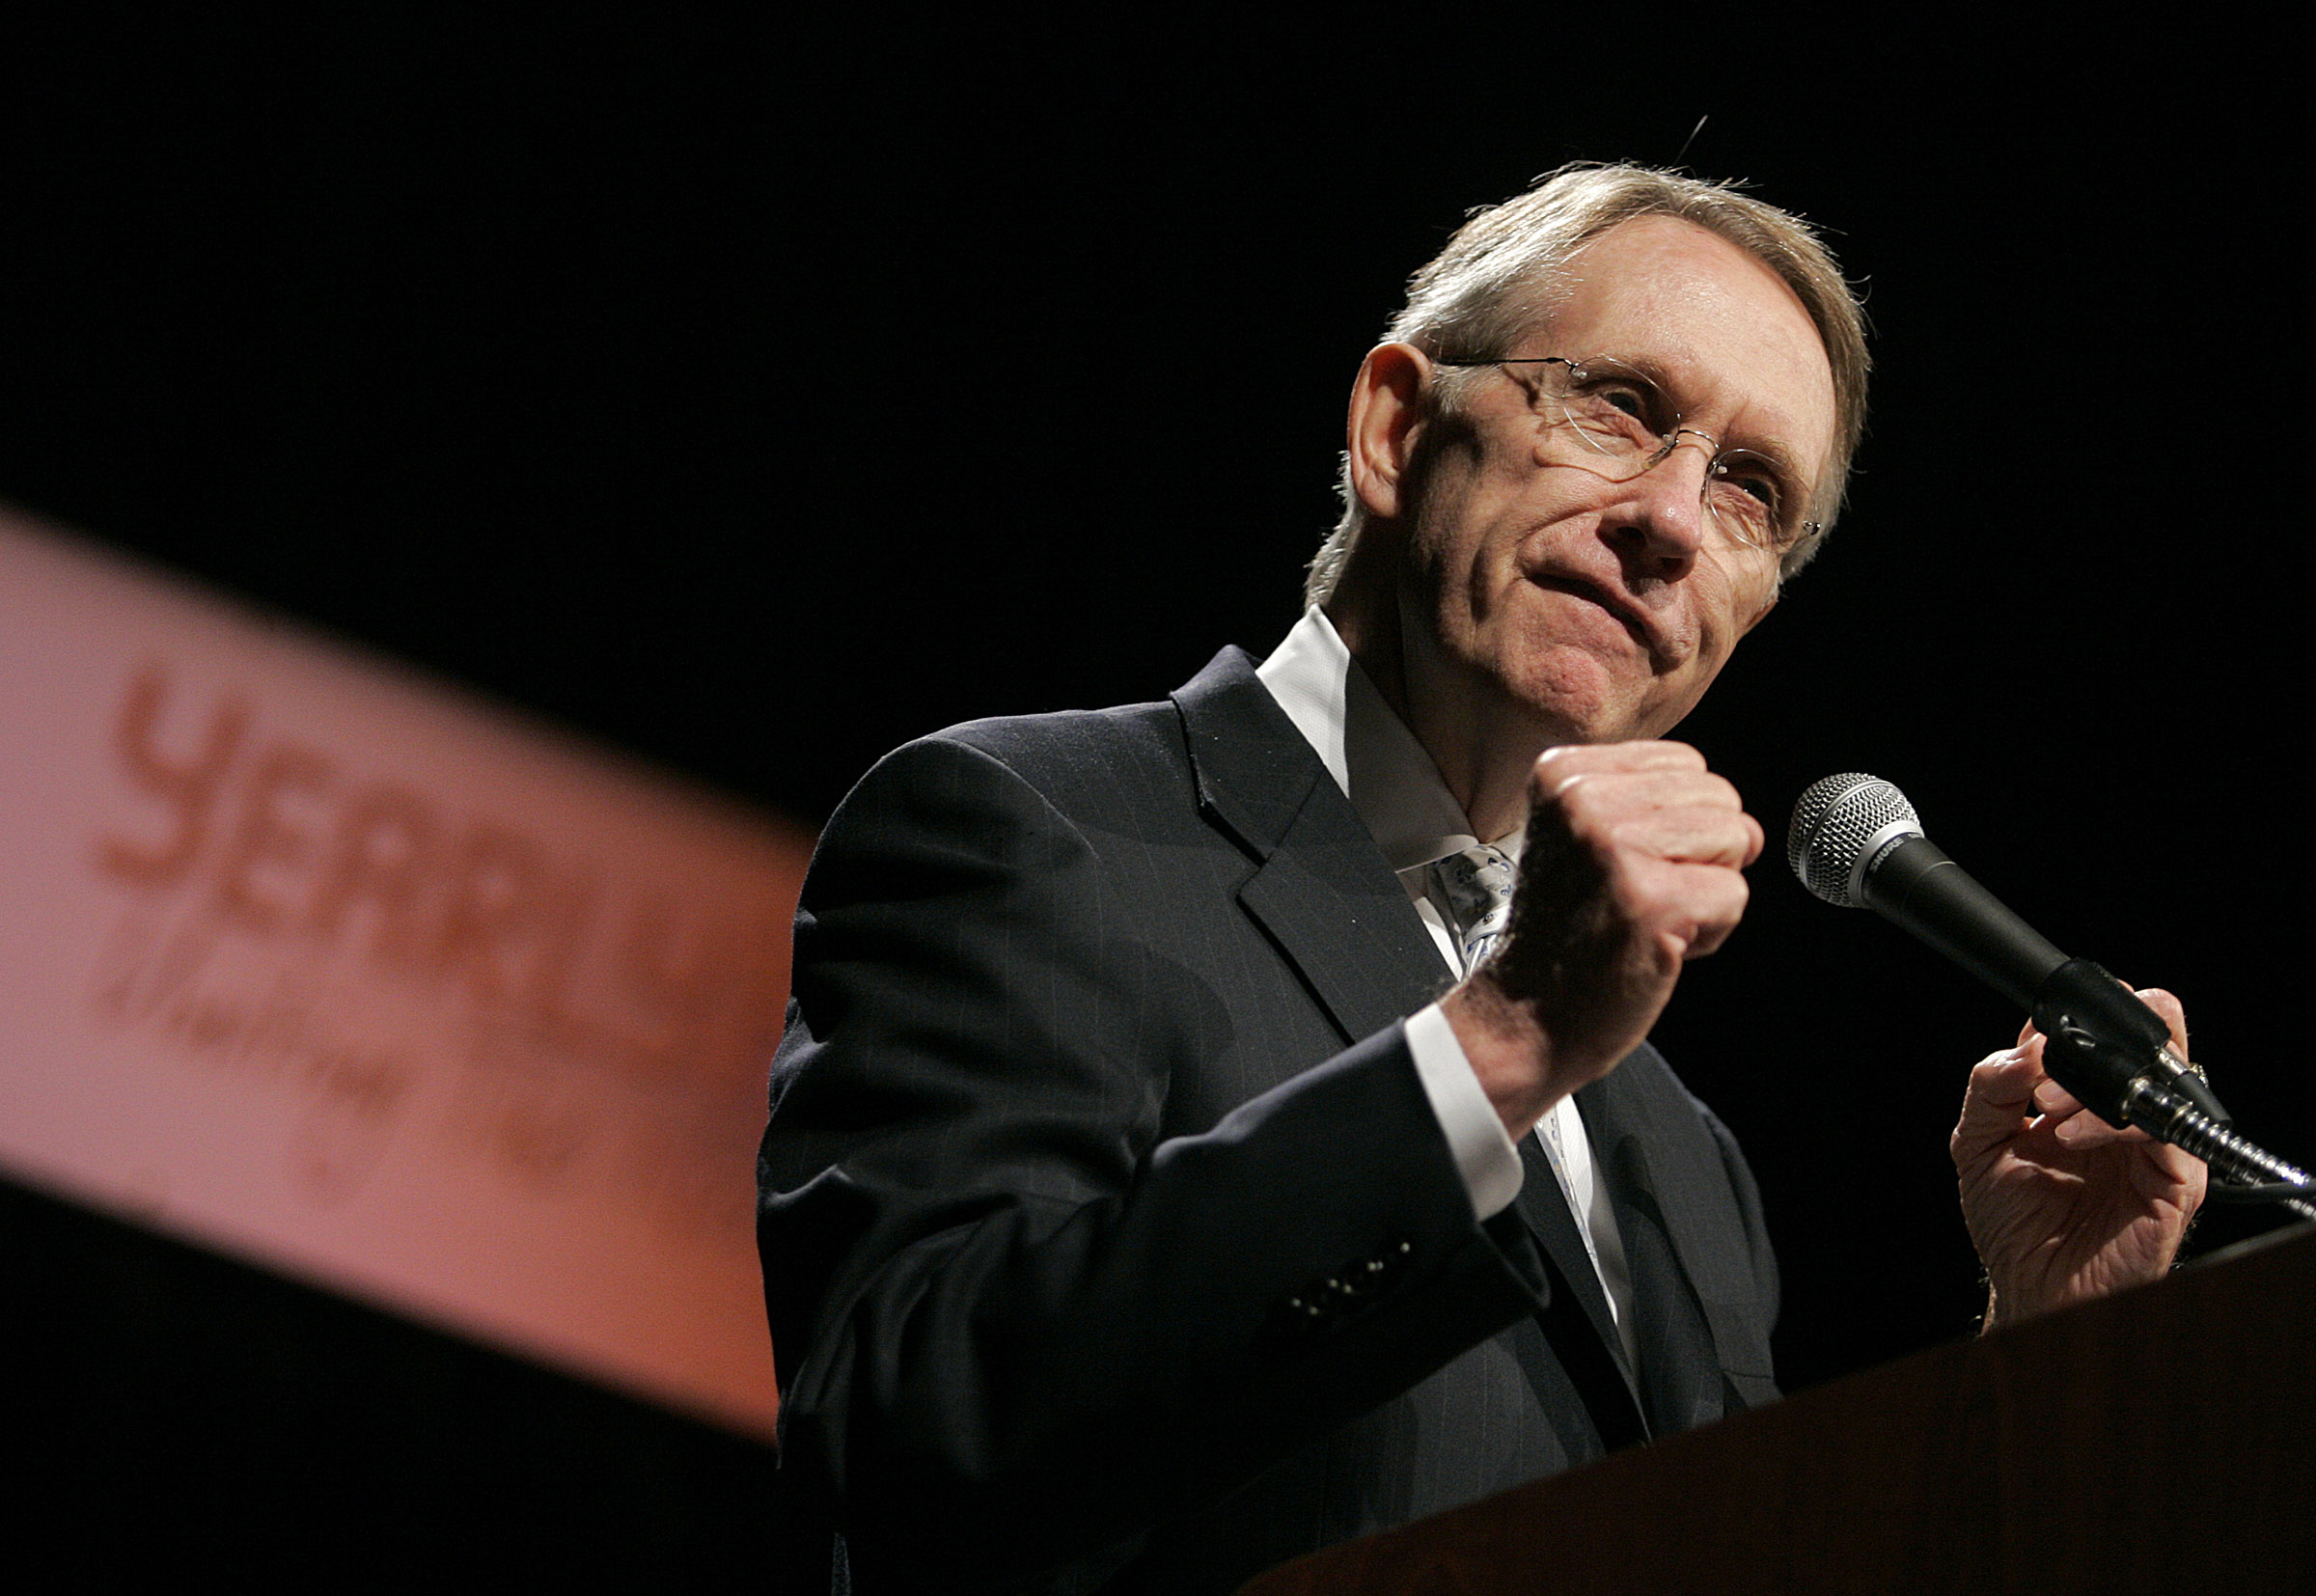 FILE - Senate Minority Leader Harry Reid, D-Nev., delivers a speech at the YearlyKos convention in Las Vegas on June 10, 2006. Reid, the former Senate majority leader and Nevada’s longest-serving member of Congress, has died. He was 82. (AP Photo/Jae C. Hong, File)